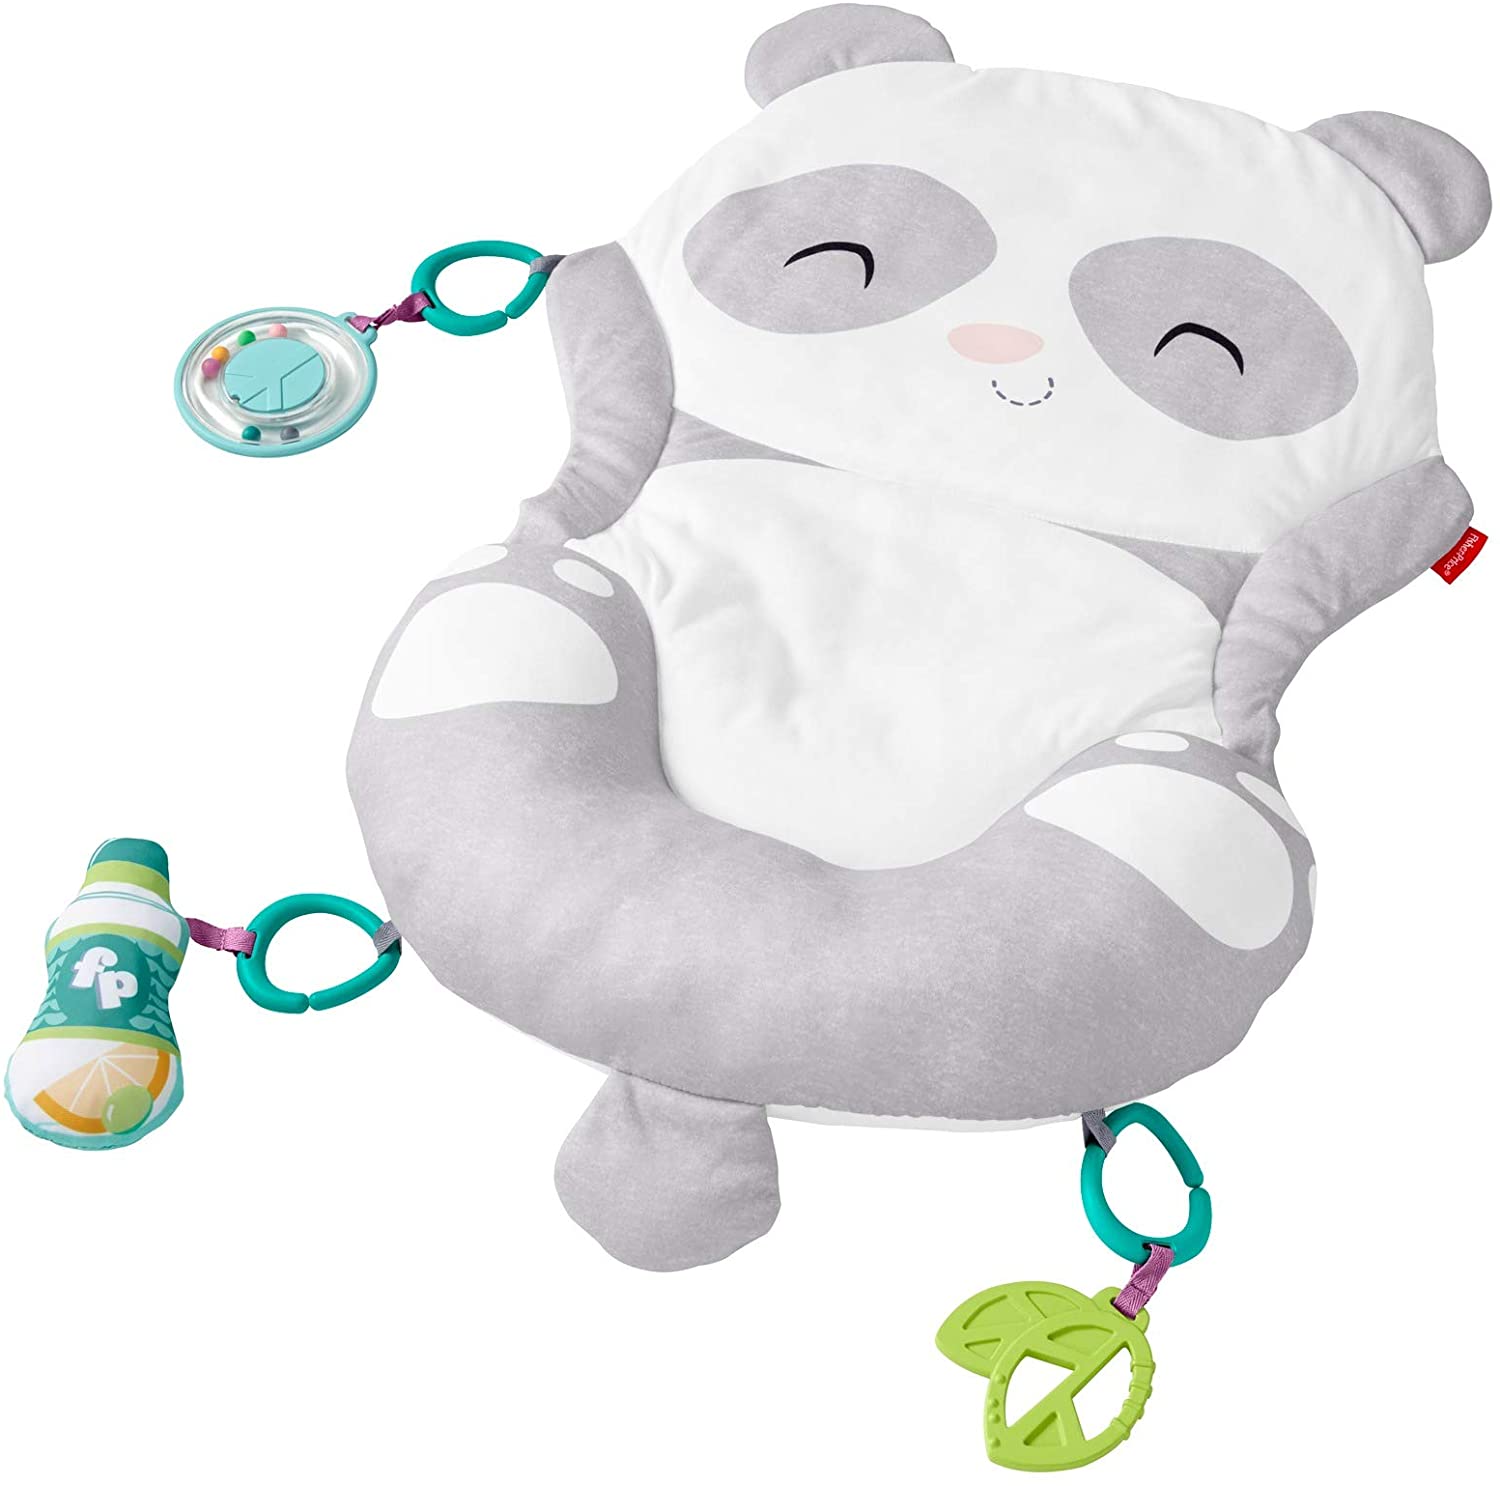 Fisher-Price Panda Play Mat - Plush Mat for Playing in the Stomach Position with Toys - Baby Accessory Suitable from Birth - GJD28